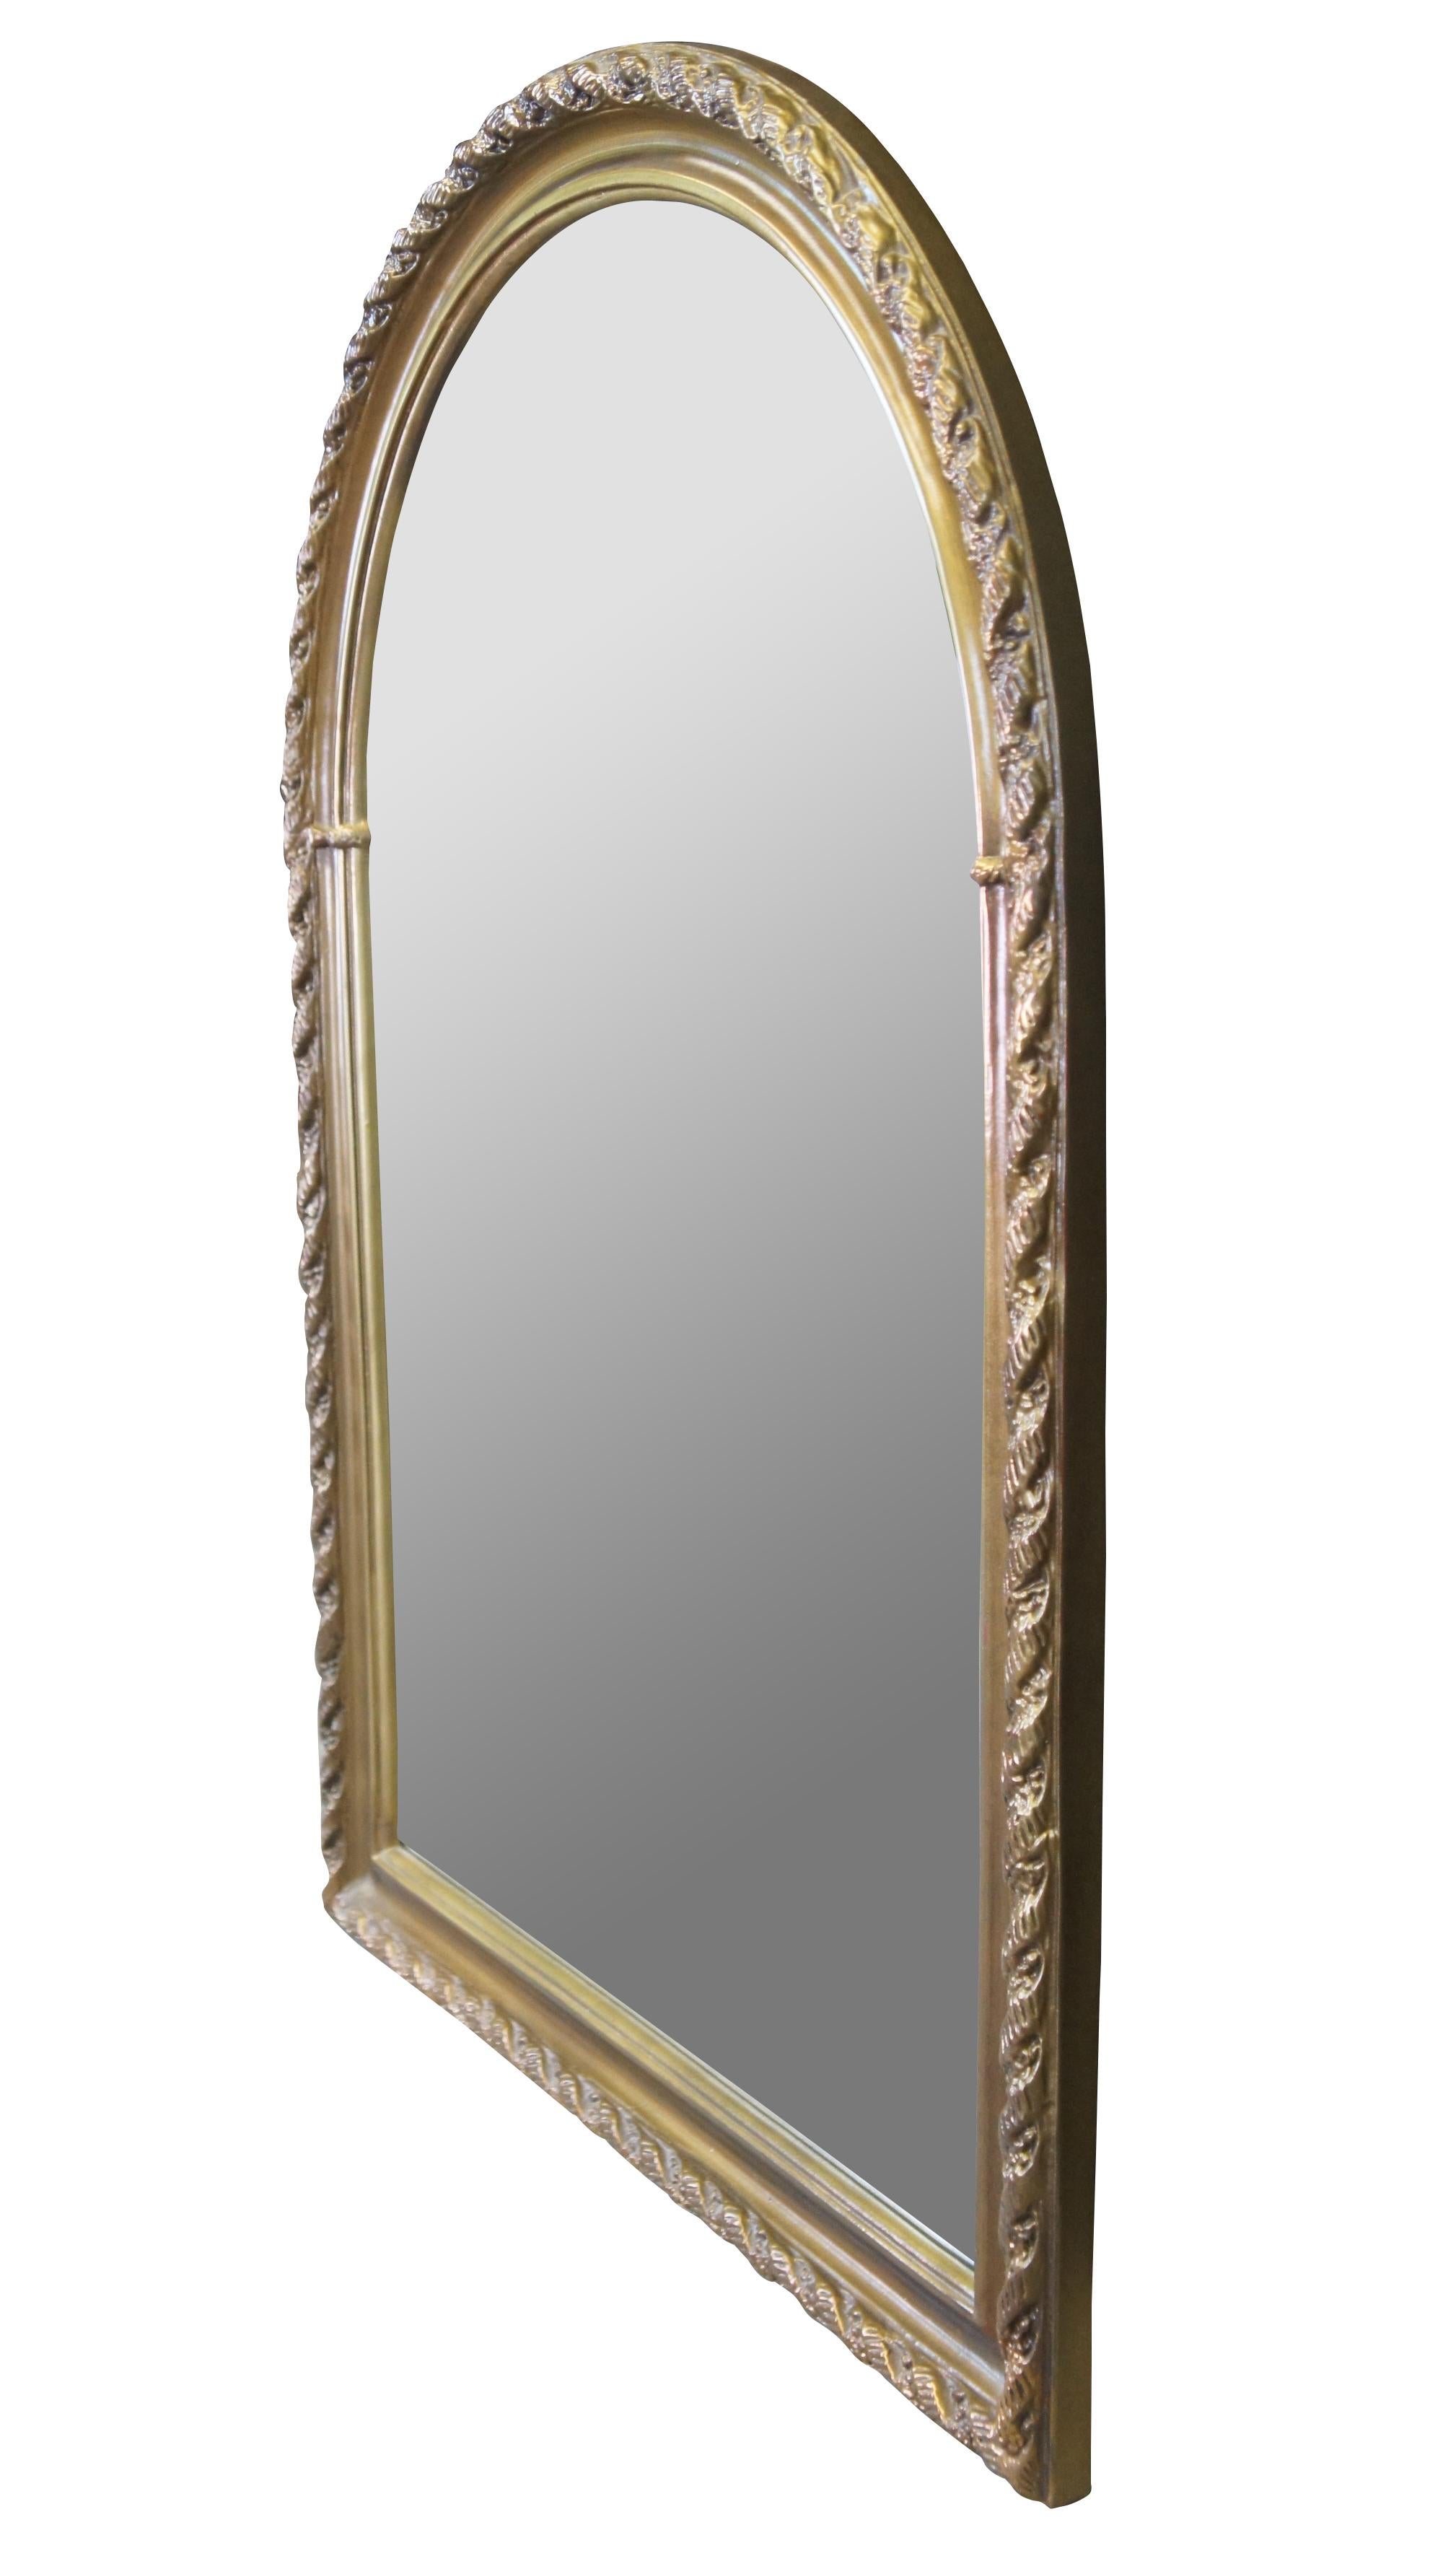 Regency Revival Victorian Revival Regency Gold Arched Ribboned Wall Mirror Beveled Glass Dome